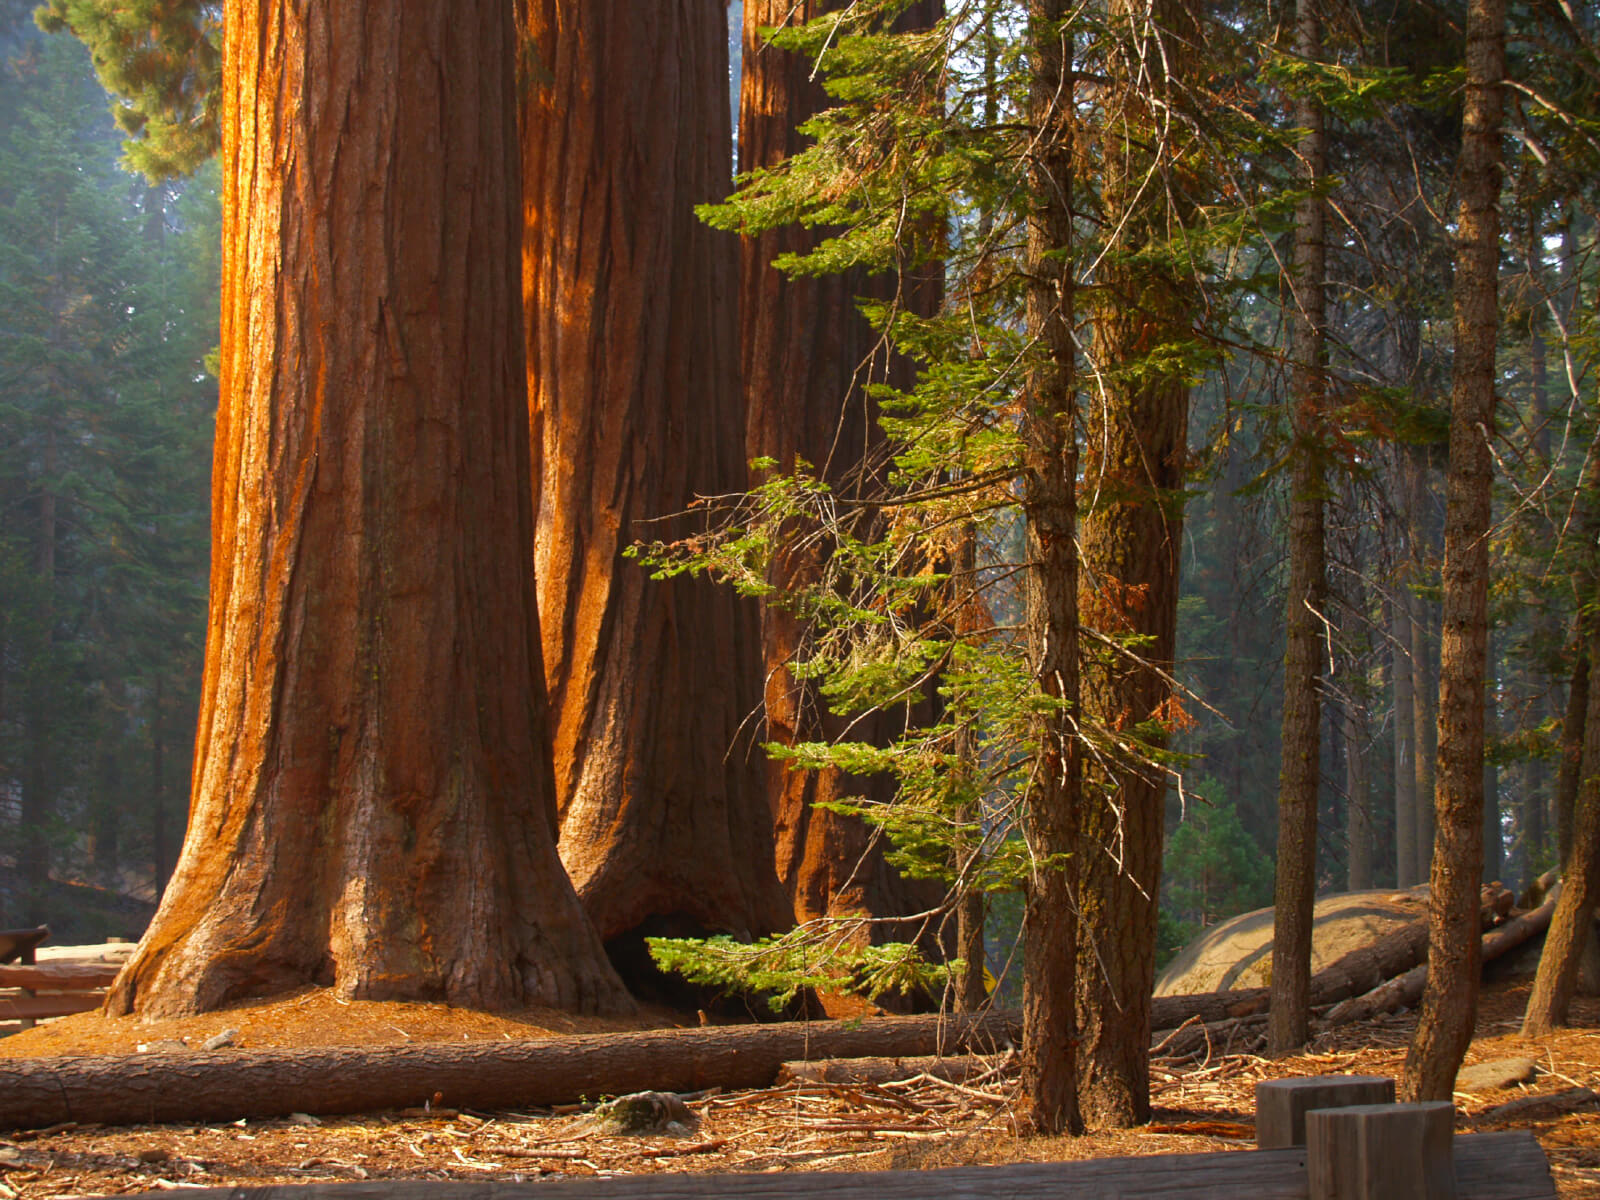 National Park Free Admission Days - Sequoia